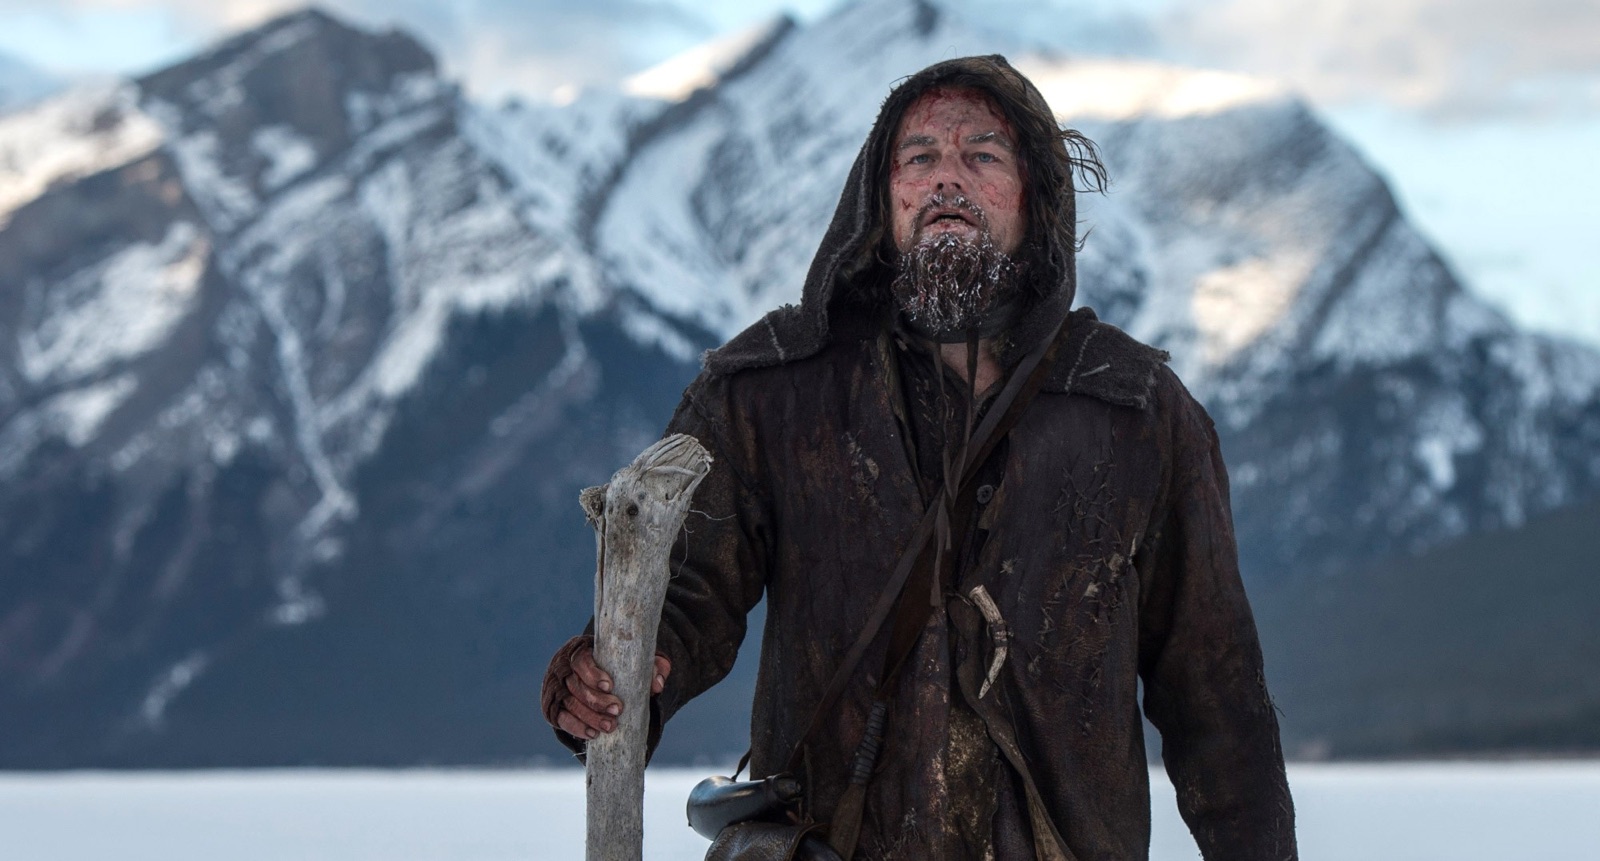 The Revenant is up for 12 Oscars